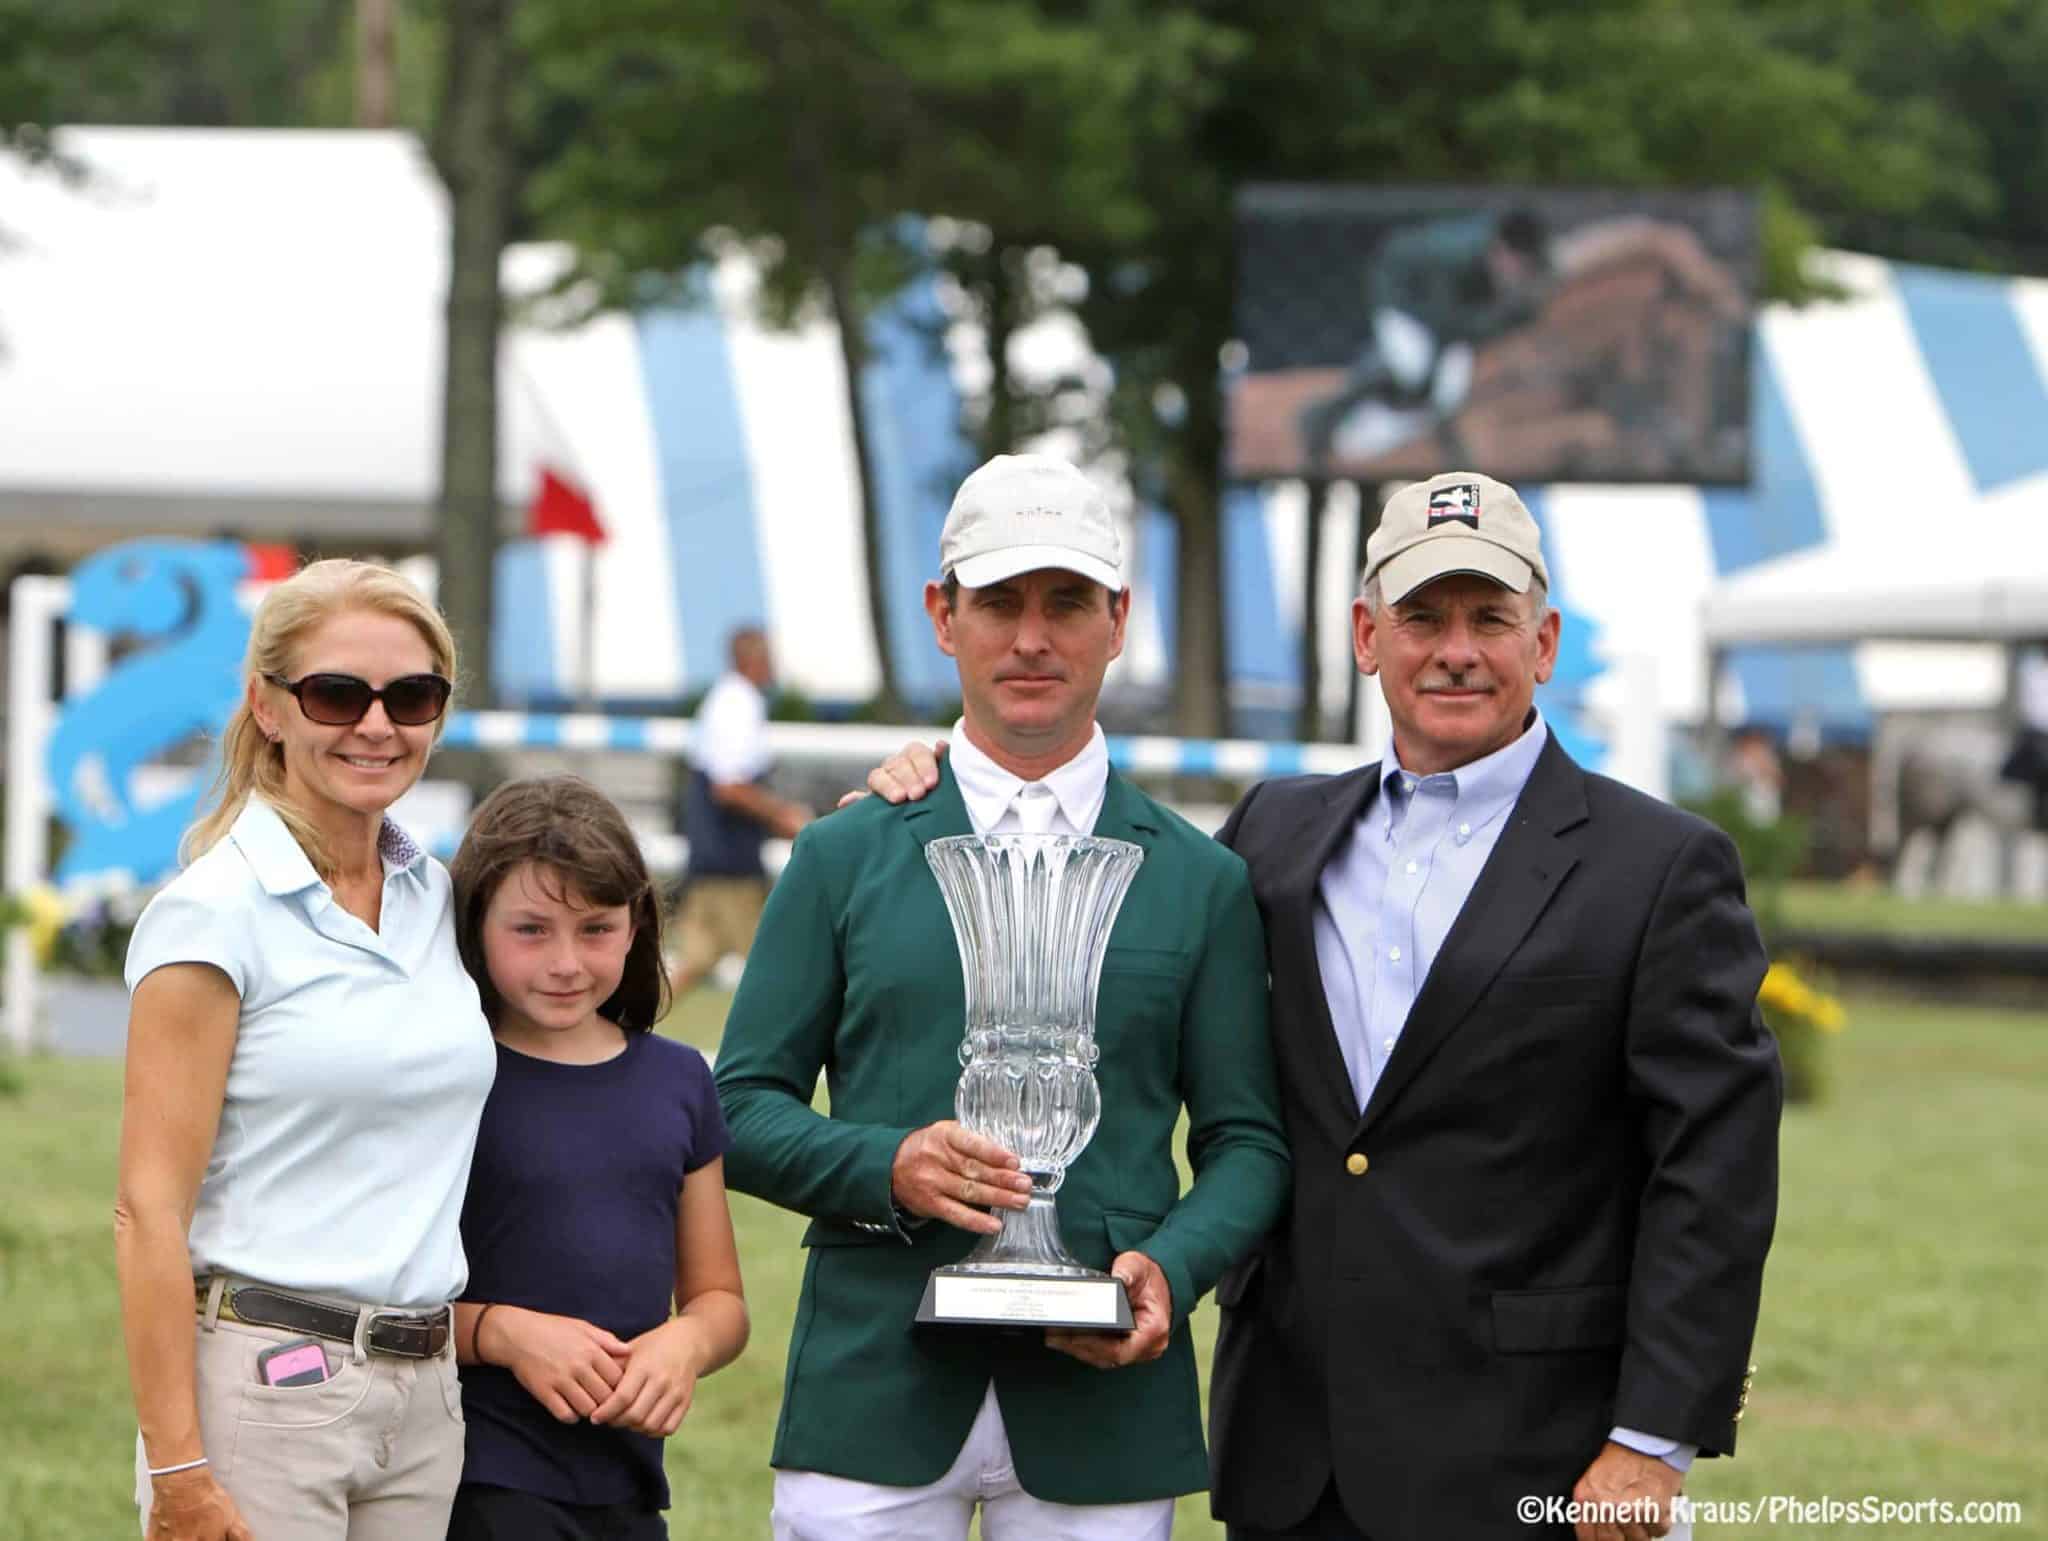 Jeff Papows with Kevin Babington and family after a win at Silver Oak Jumper Tournament, Photo by: Kenneth Kraus